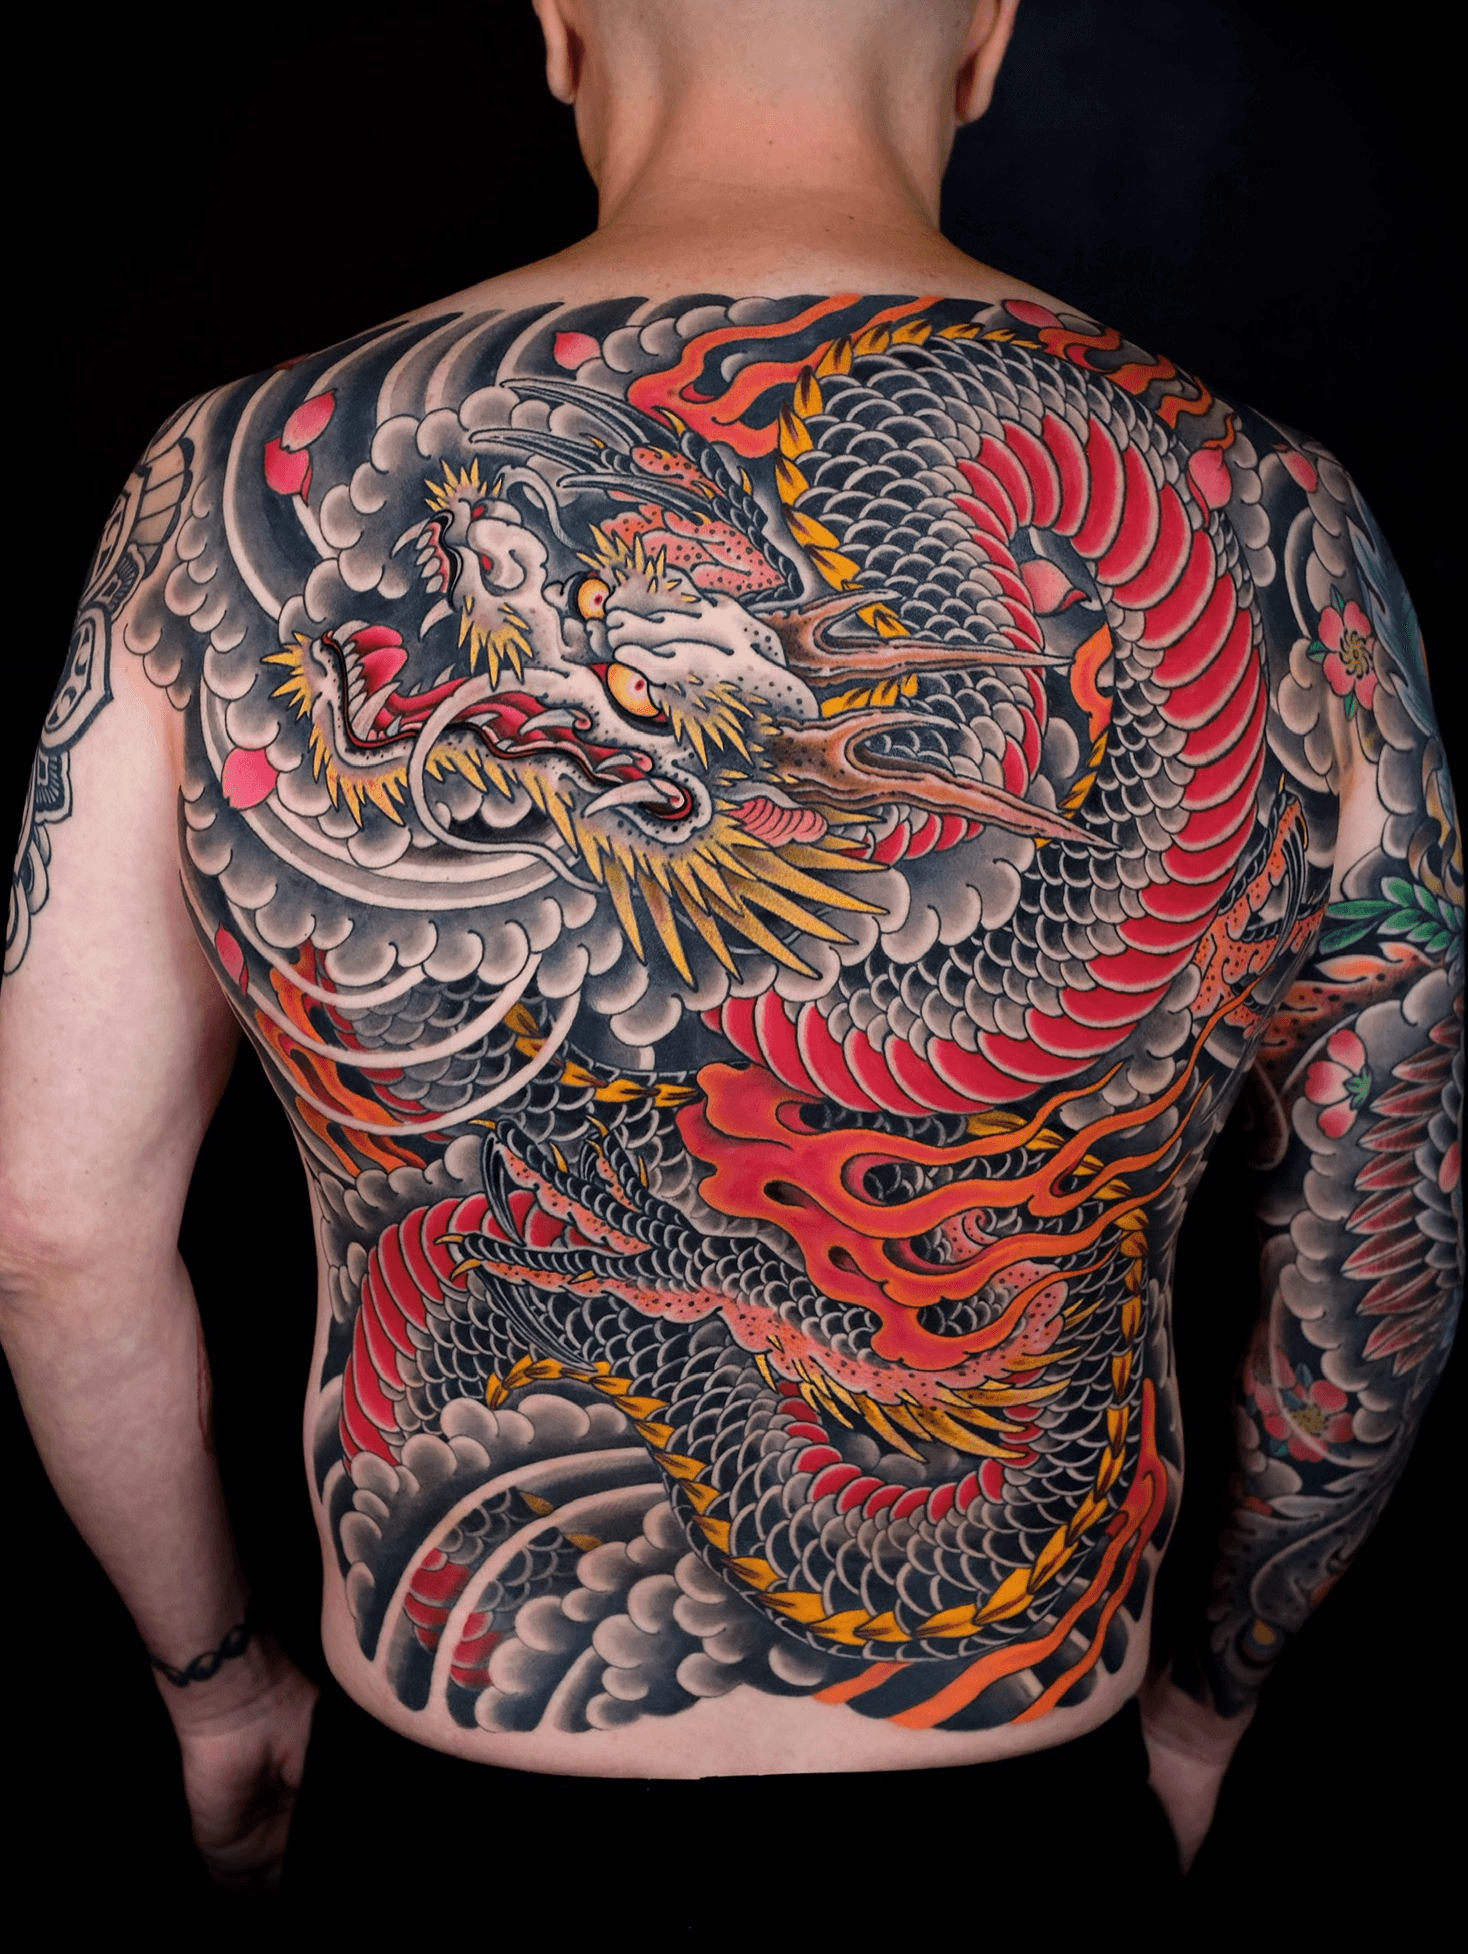 Incredible full back piece from Boye  Killer Ink Tattoo  Facebook